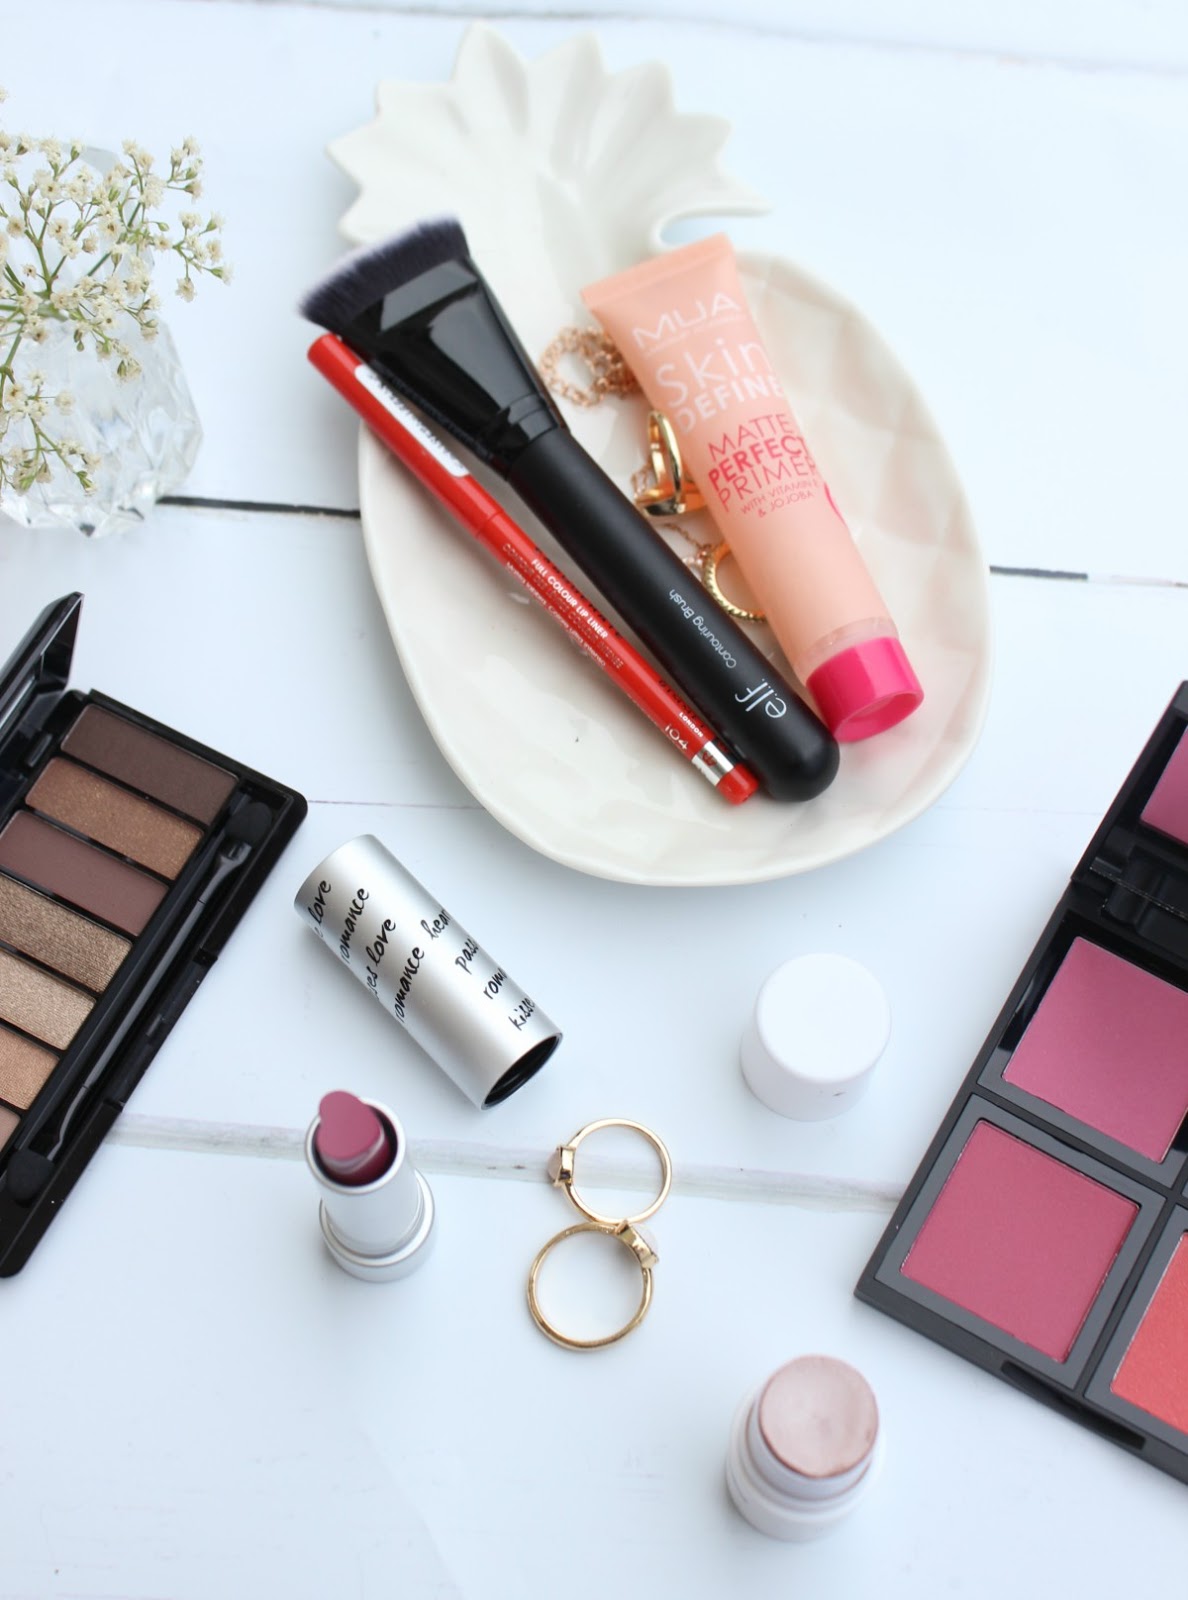 7 Budget Beauty Products You've Got to Try